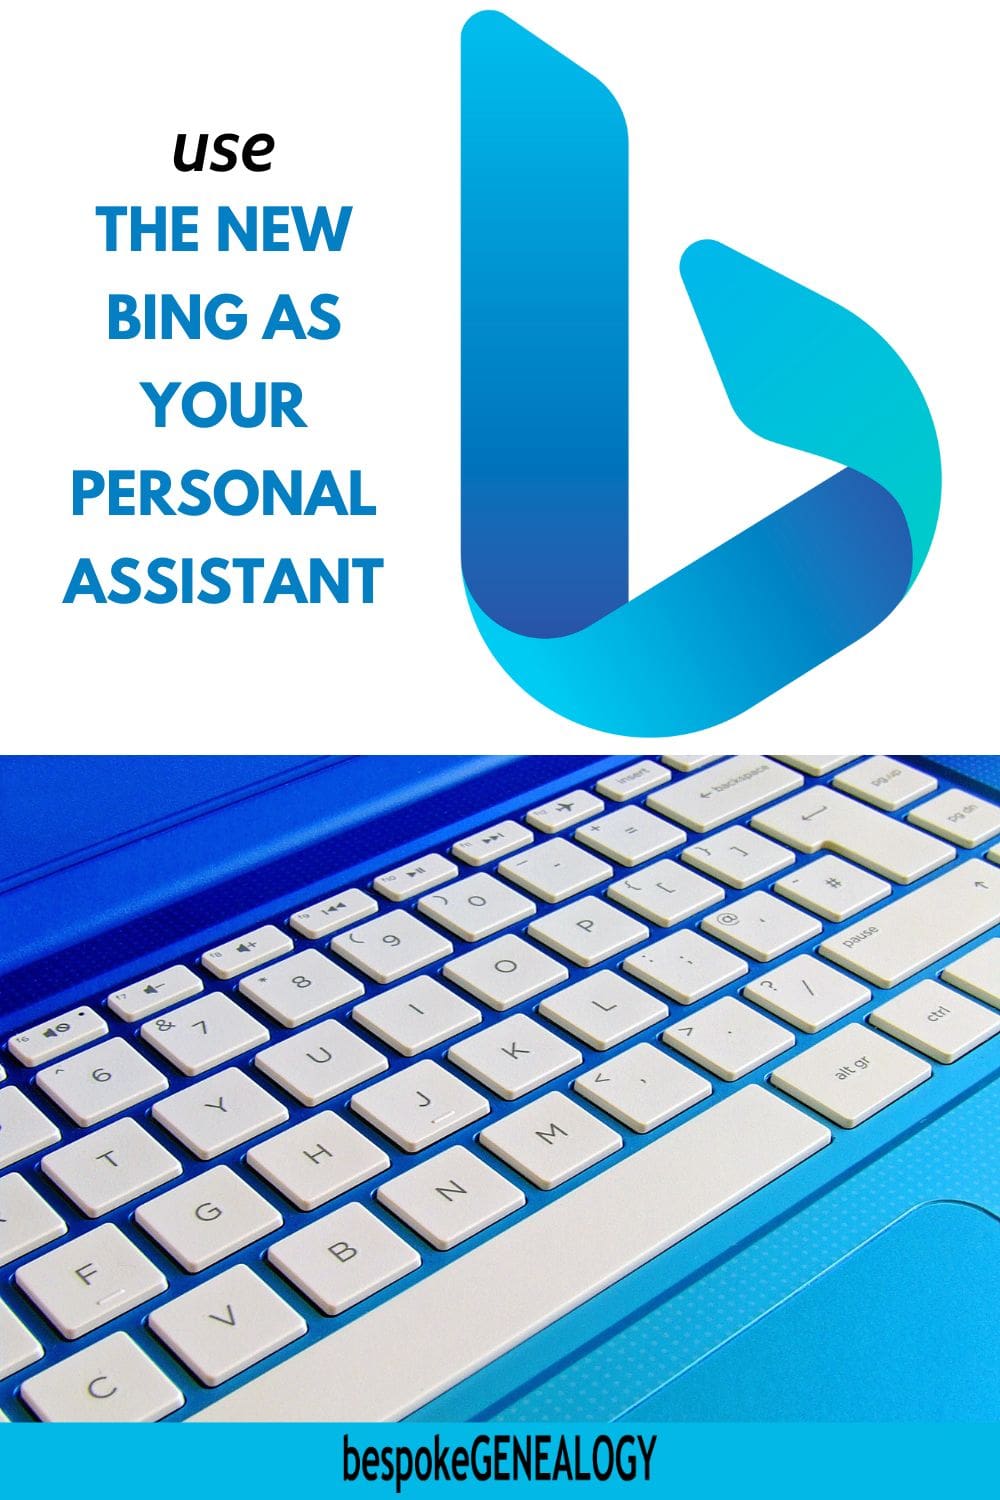 Use the new Bing as your Personal Assistant. Image of the Bing logo and a laptop keyboard.